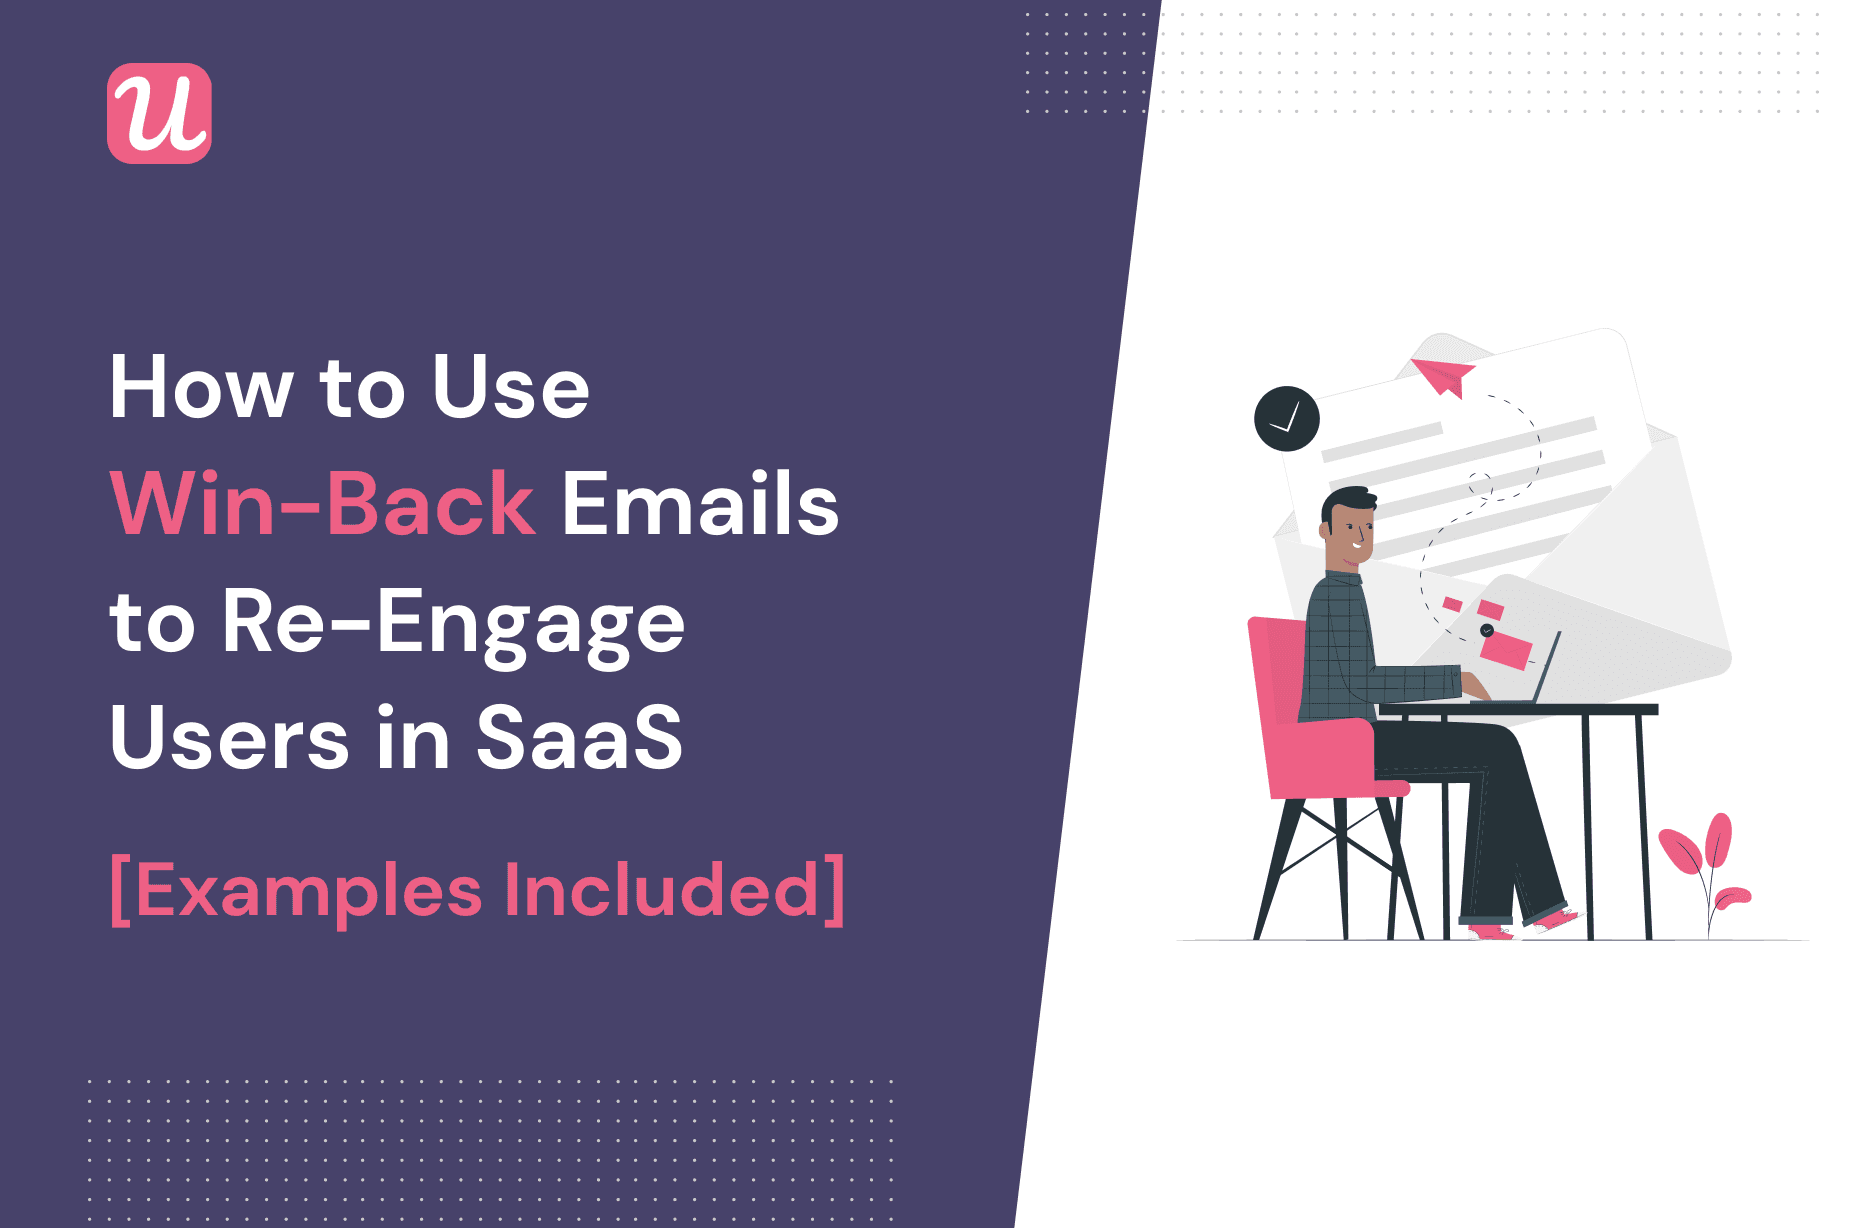 How To Use Win-Back Emails To Re-Engage Users In SaaS [Examples Included]